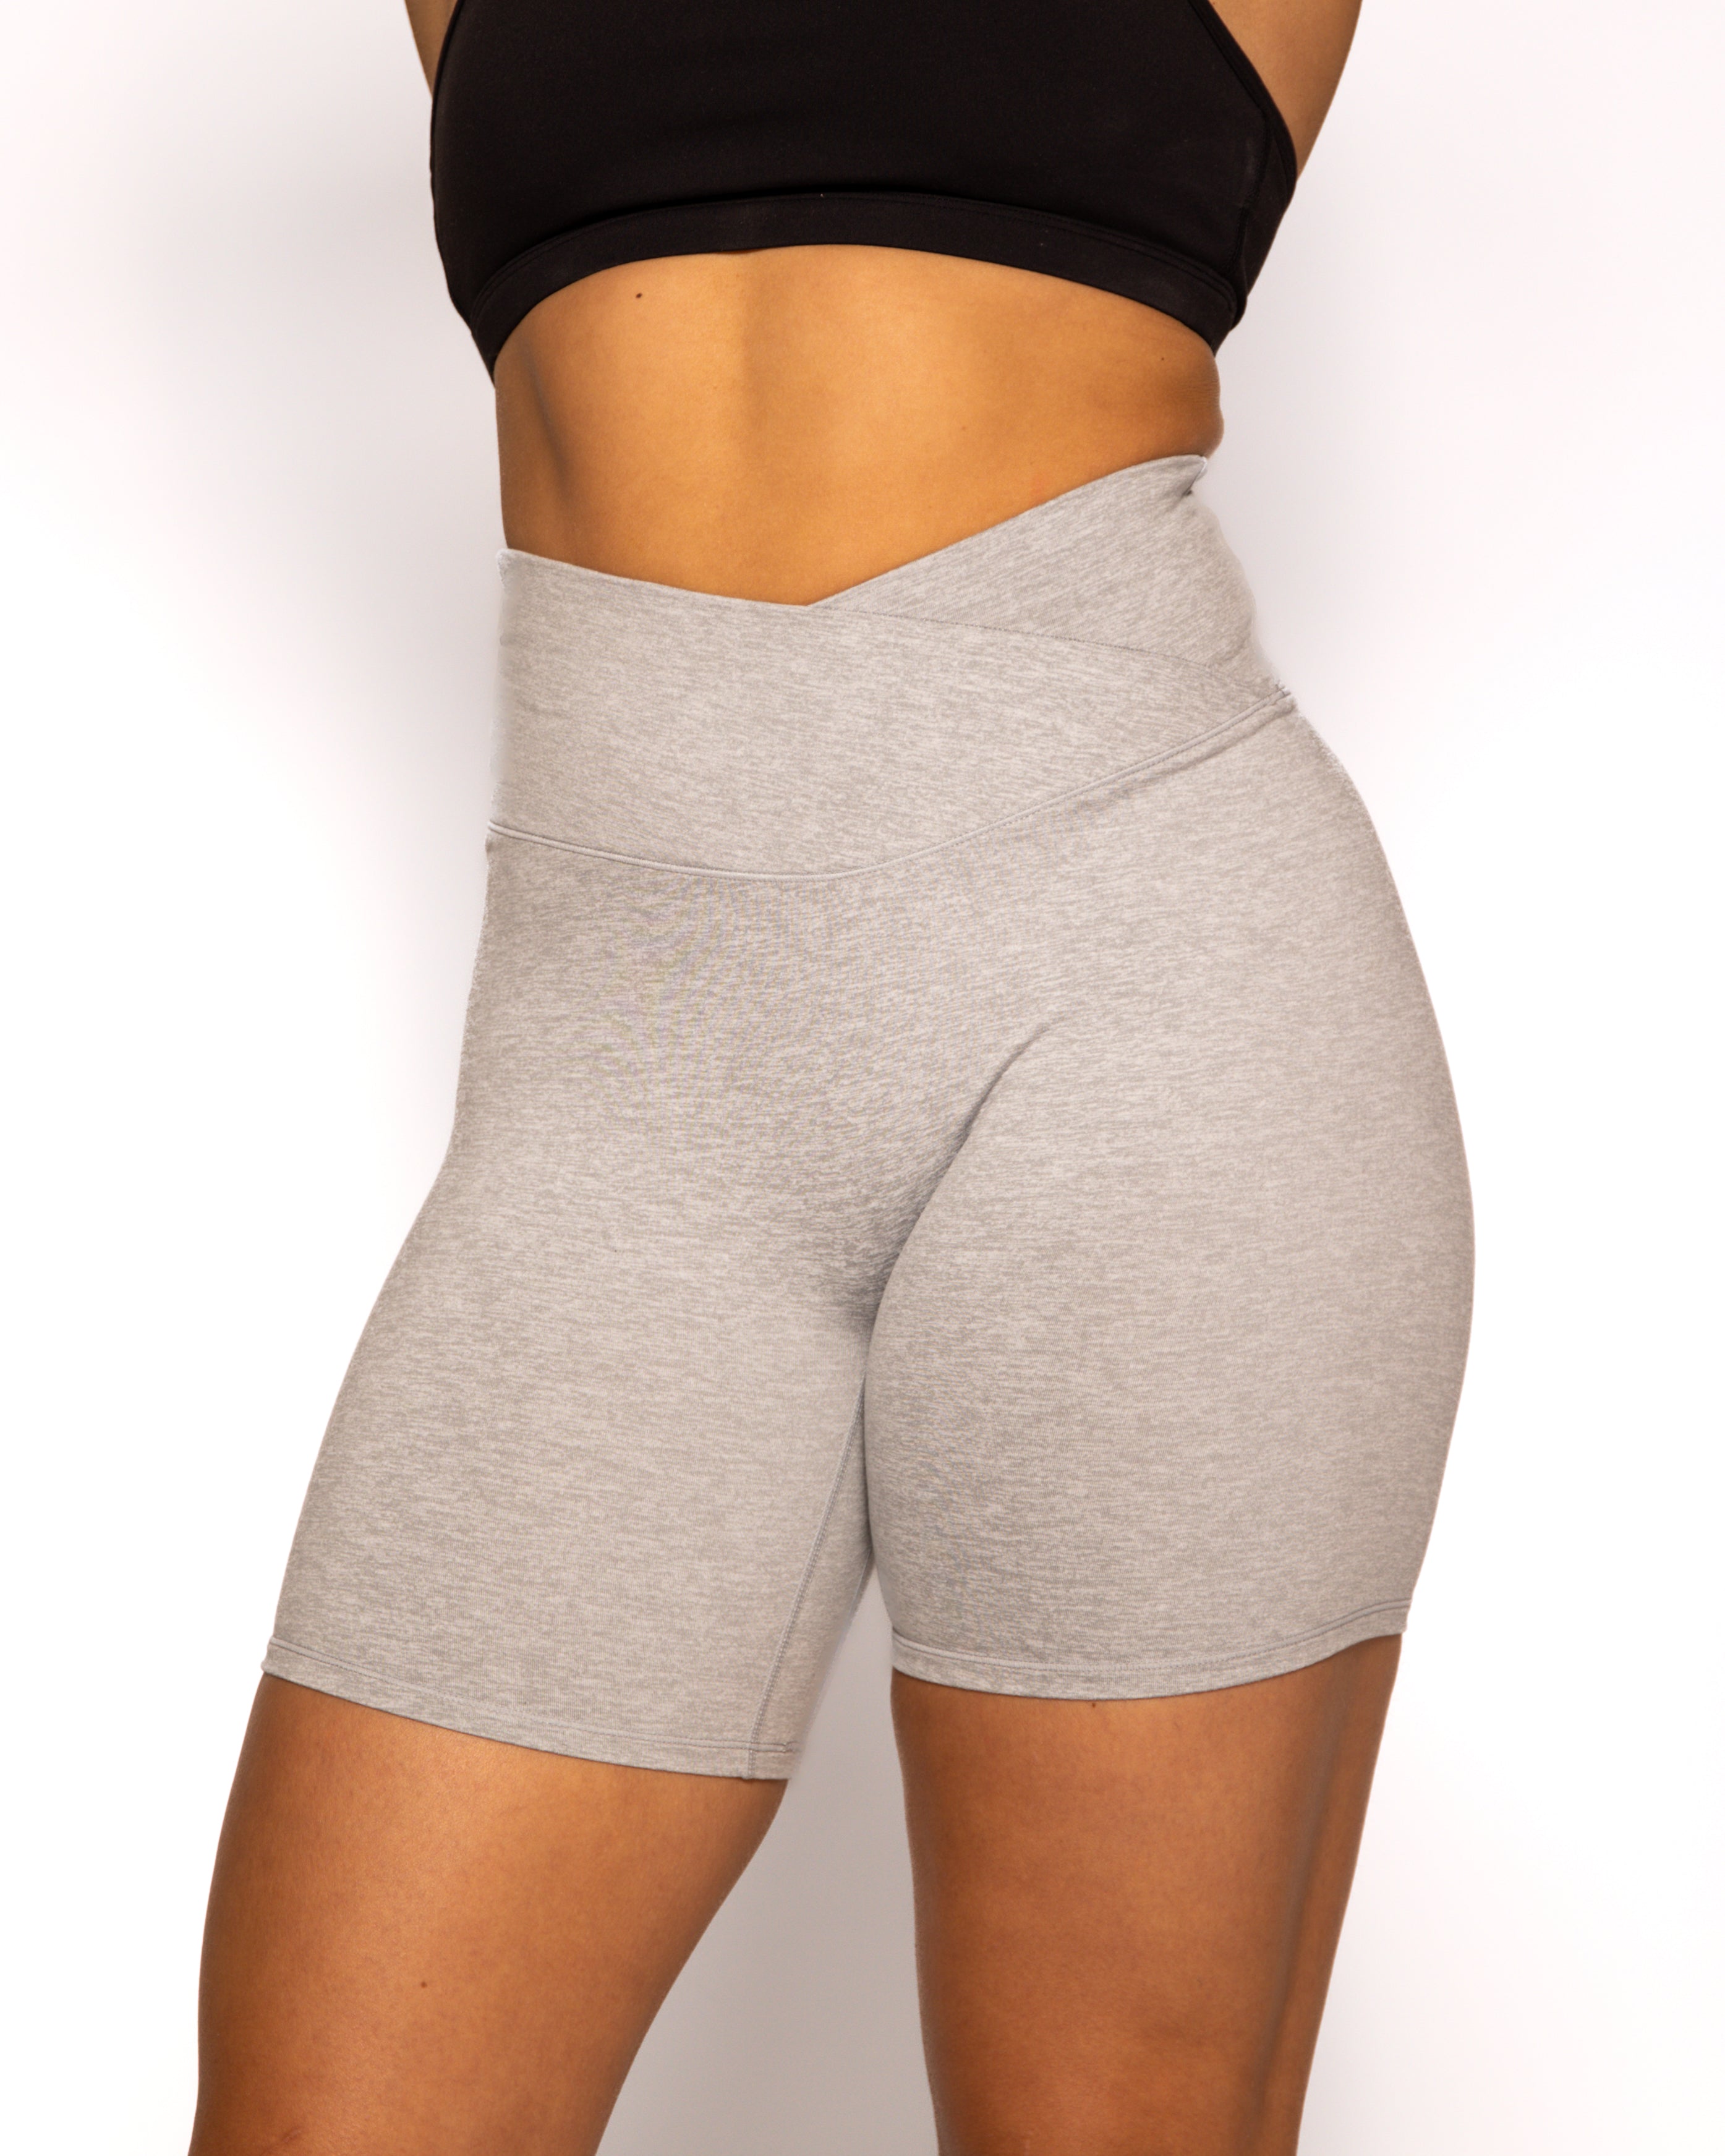 The Bare Warmth Short : 6" - Ice Grey